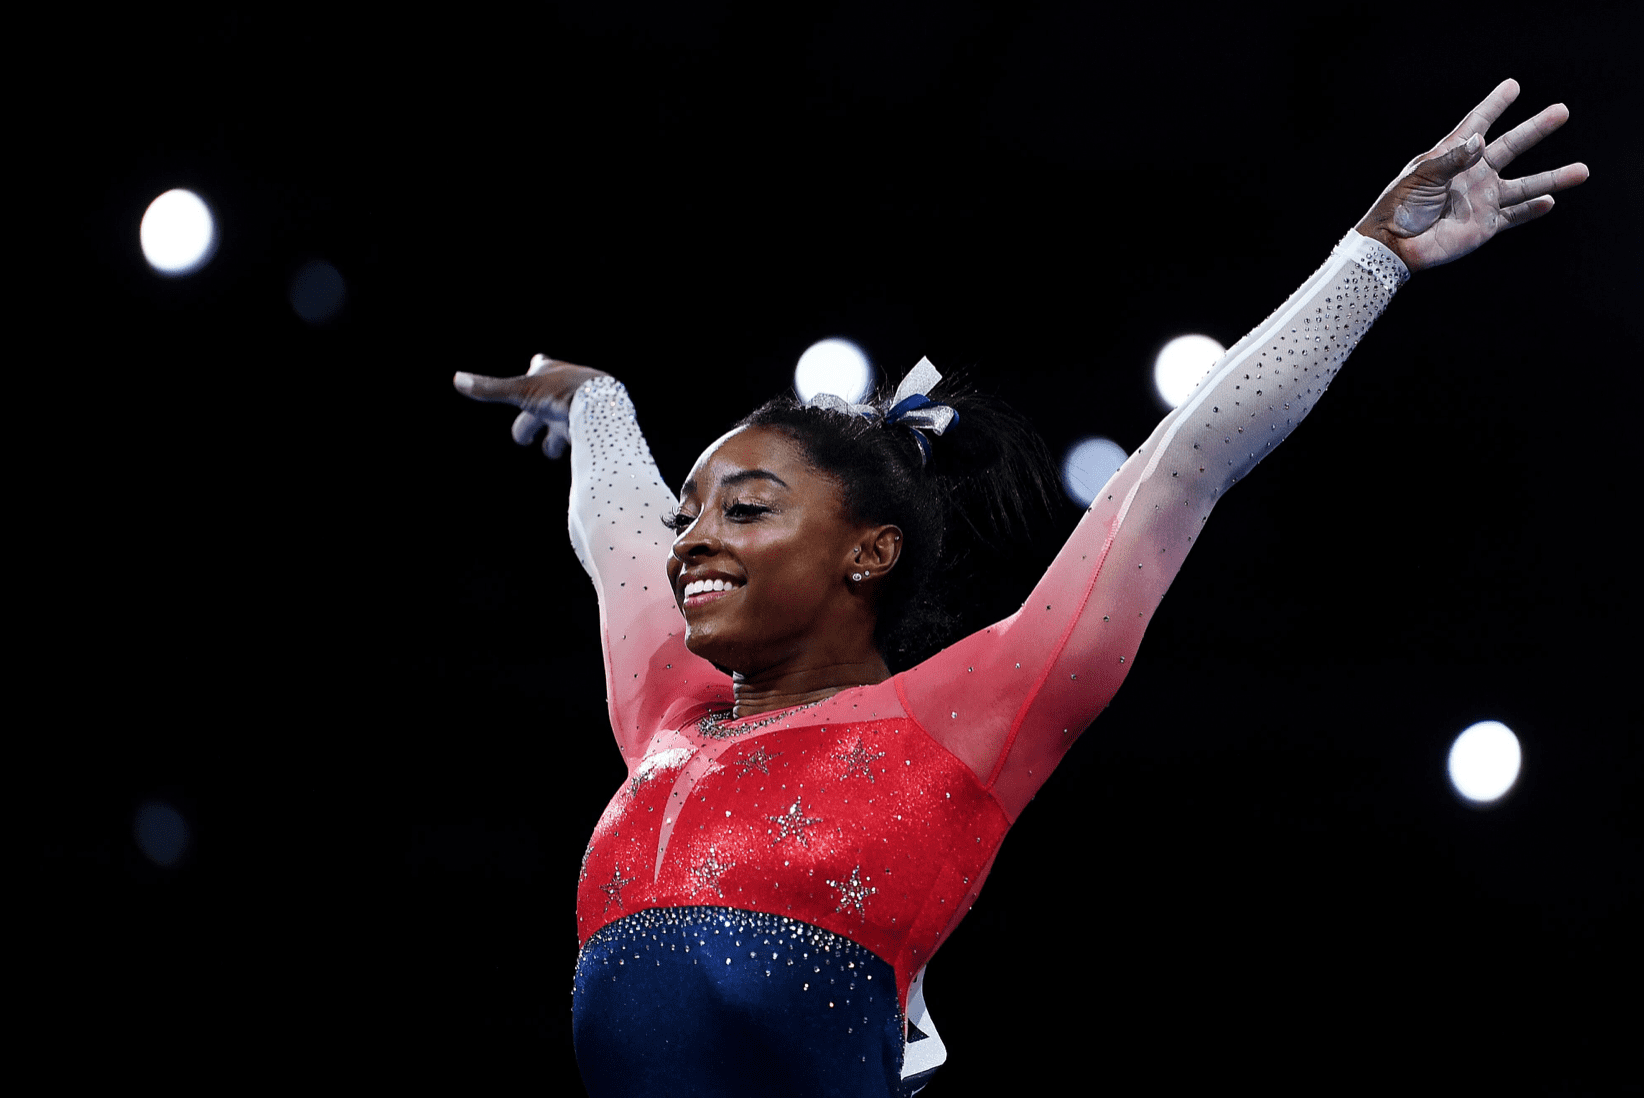 Simone Biles during her performance at the FIG Artistic Gymnastics World Championships on October 8, 2019. | Source: Getty Images